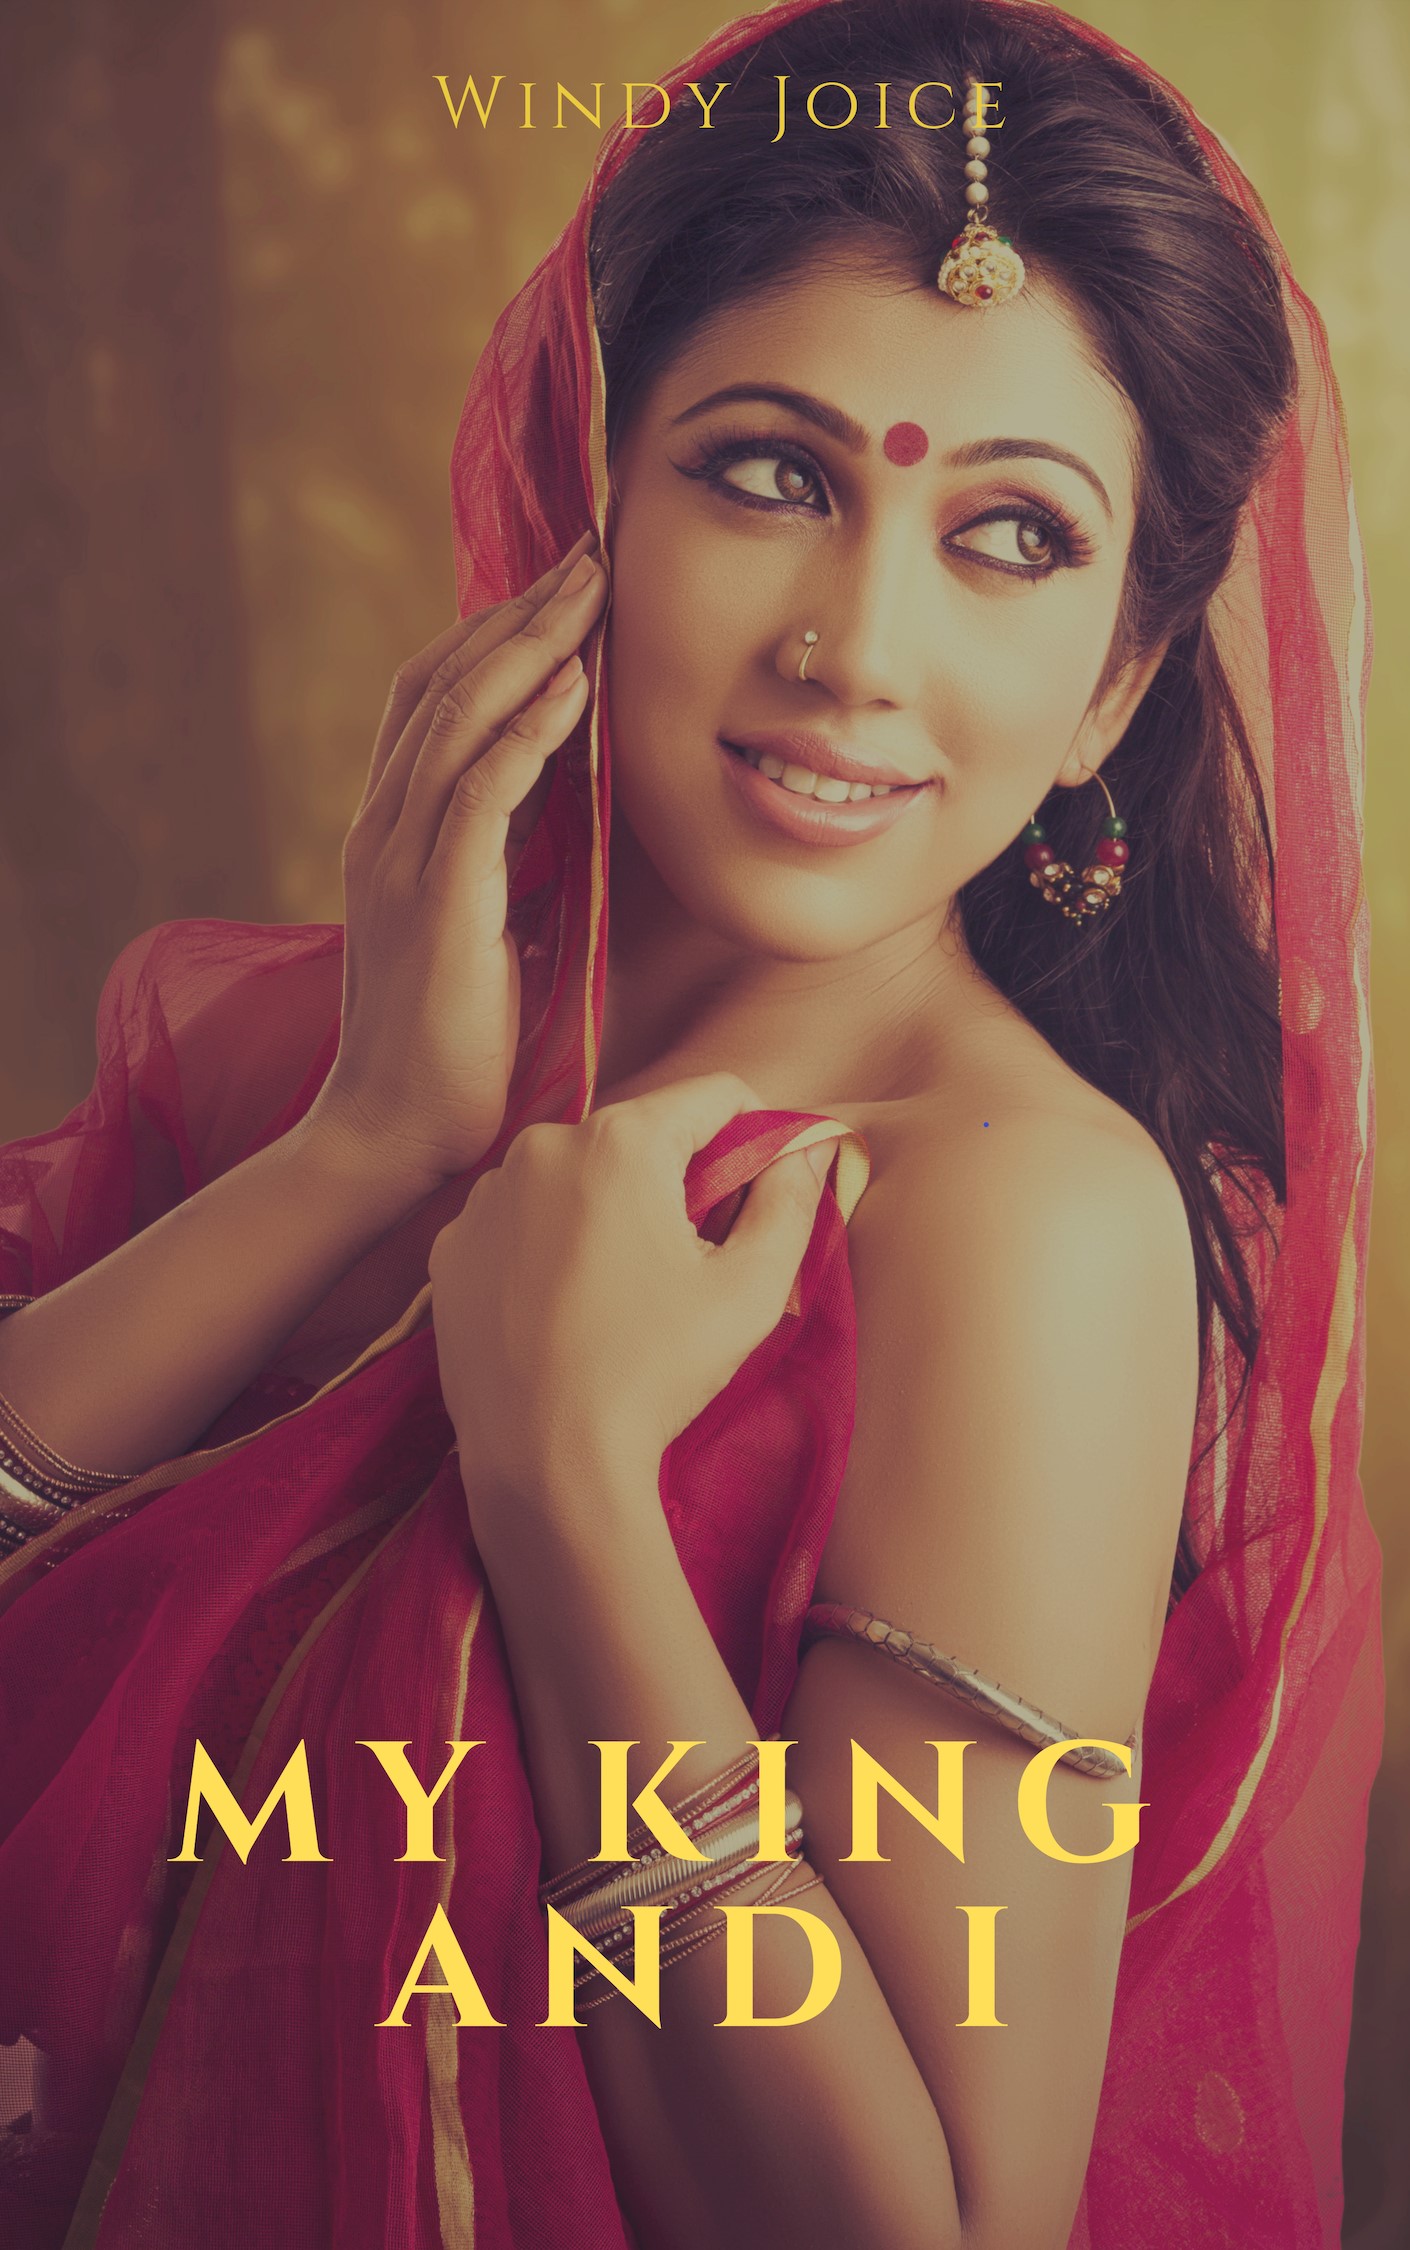 FREE: My King and I by Windy Joice